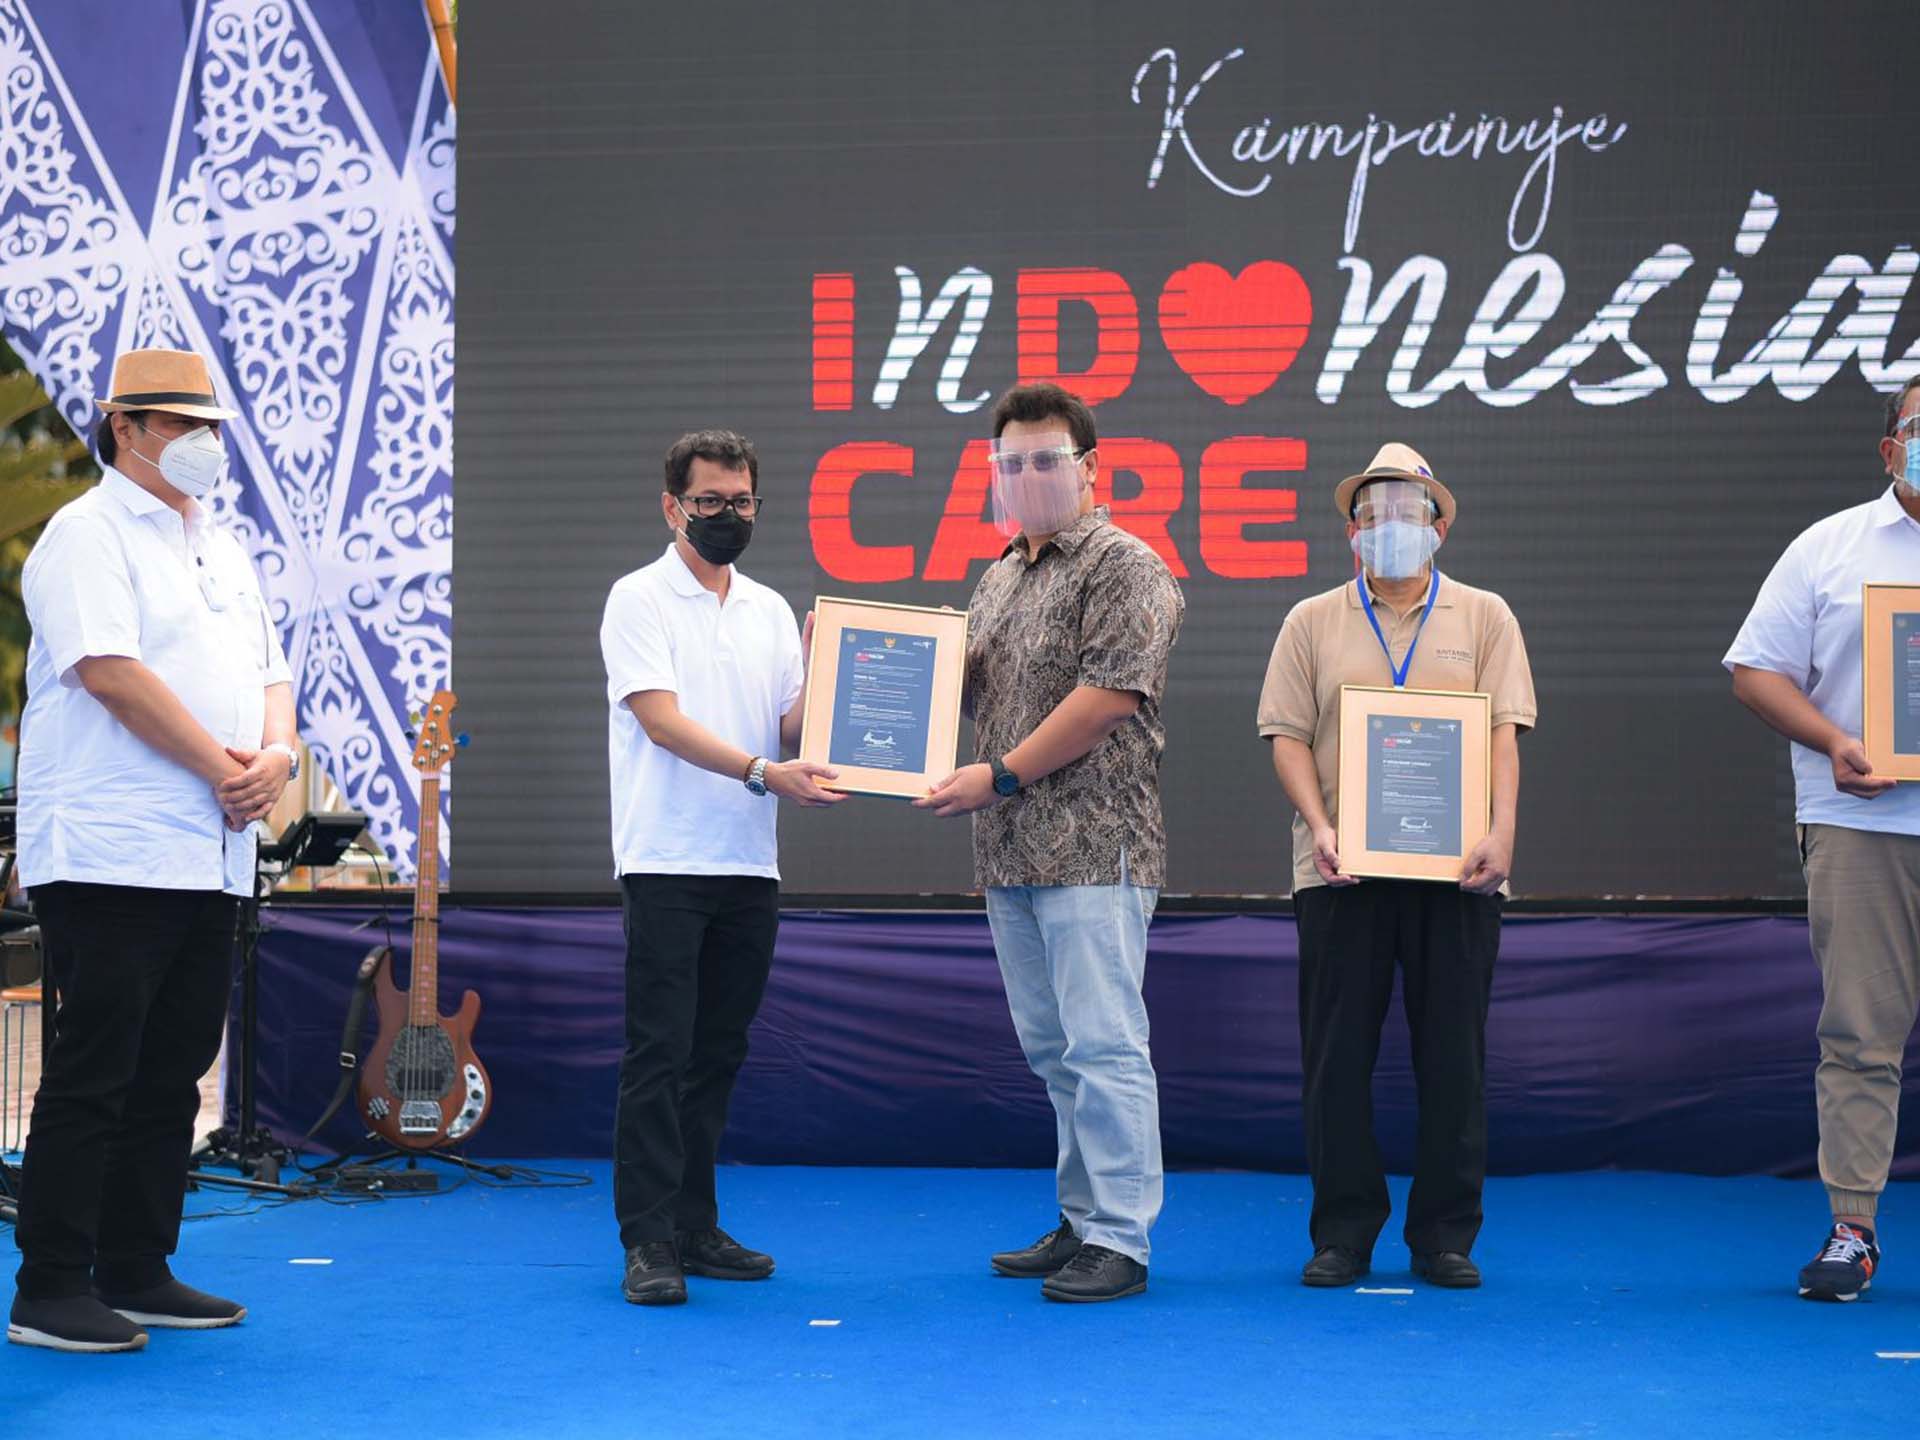 Leaders Meeting — I do Care Indonesia event